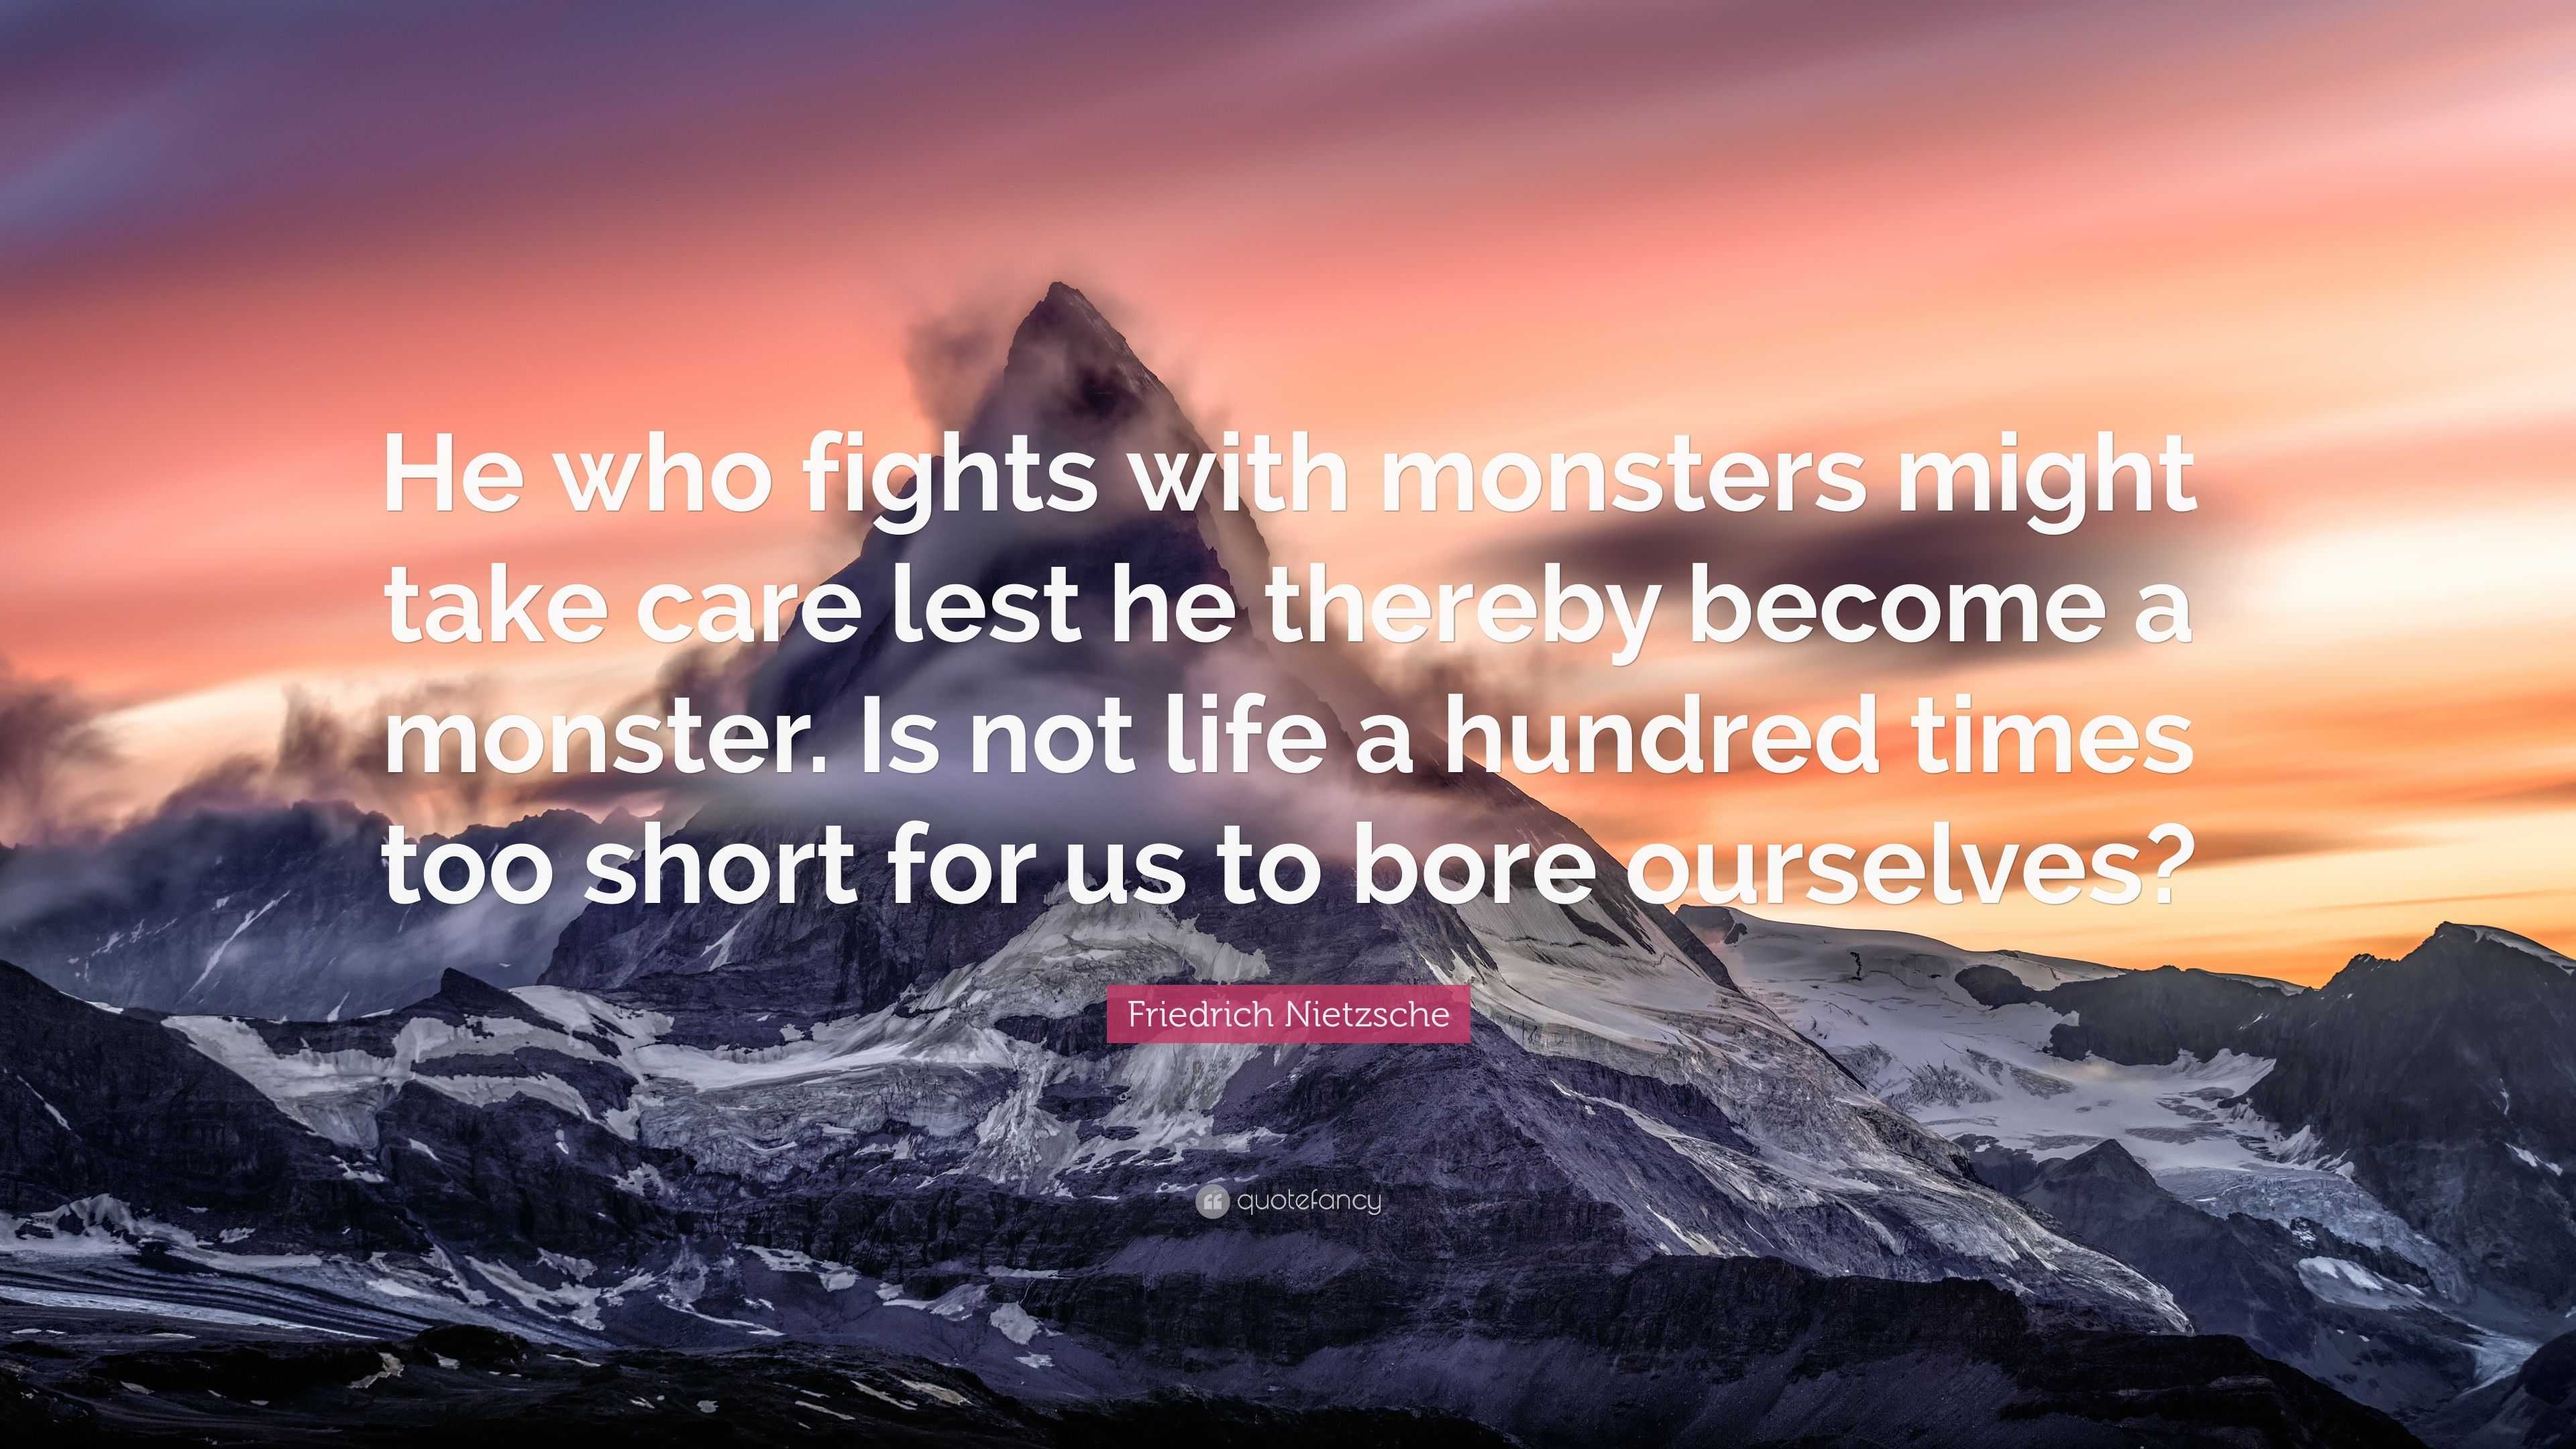 Friedrich Nietzsche Quote “he Who Fights With Monsters Might Take Care